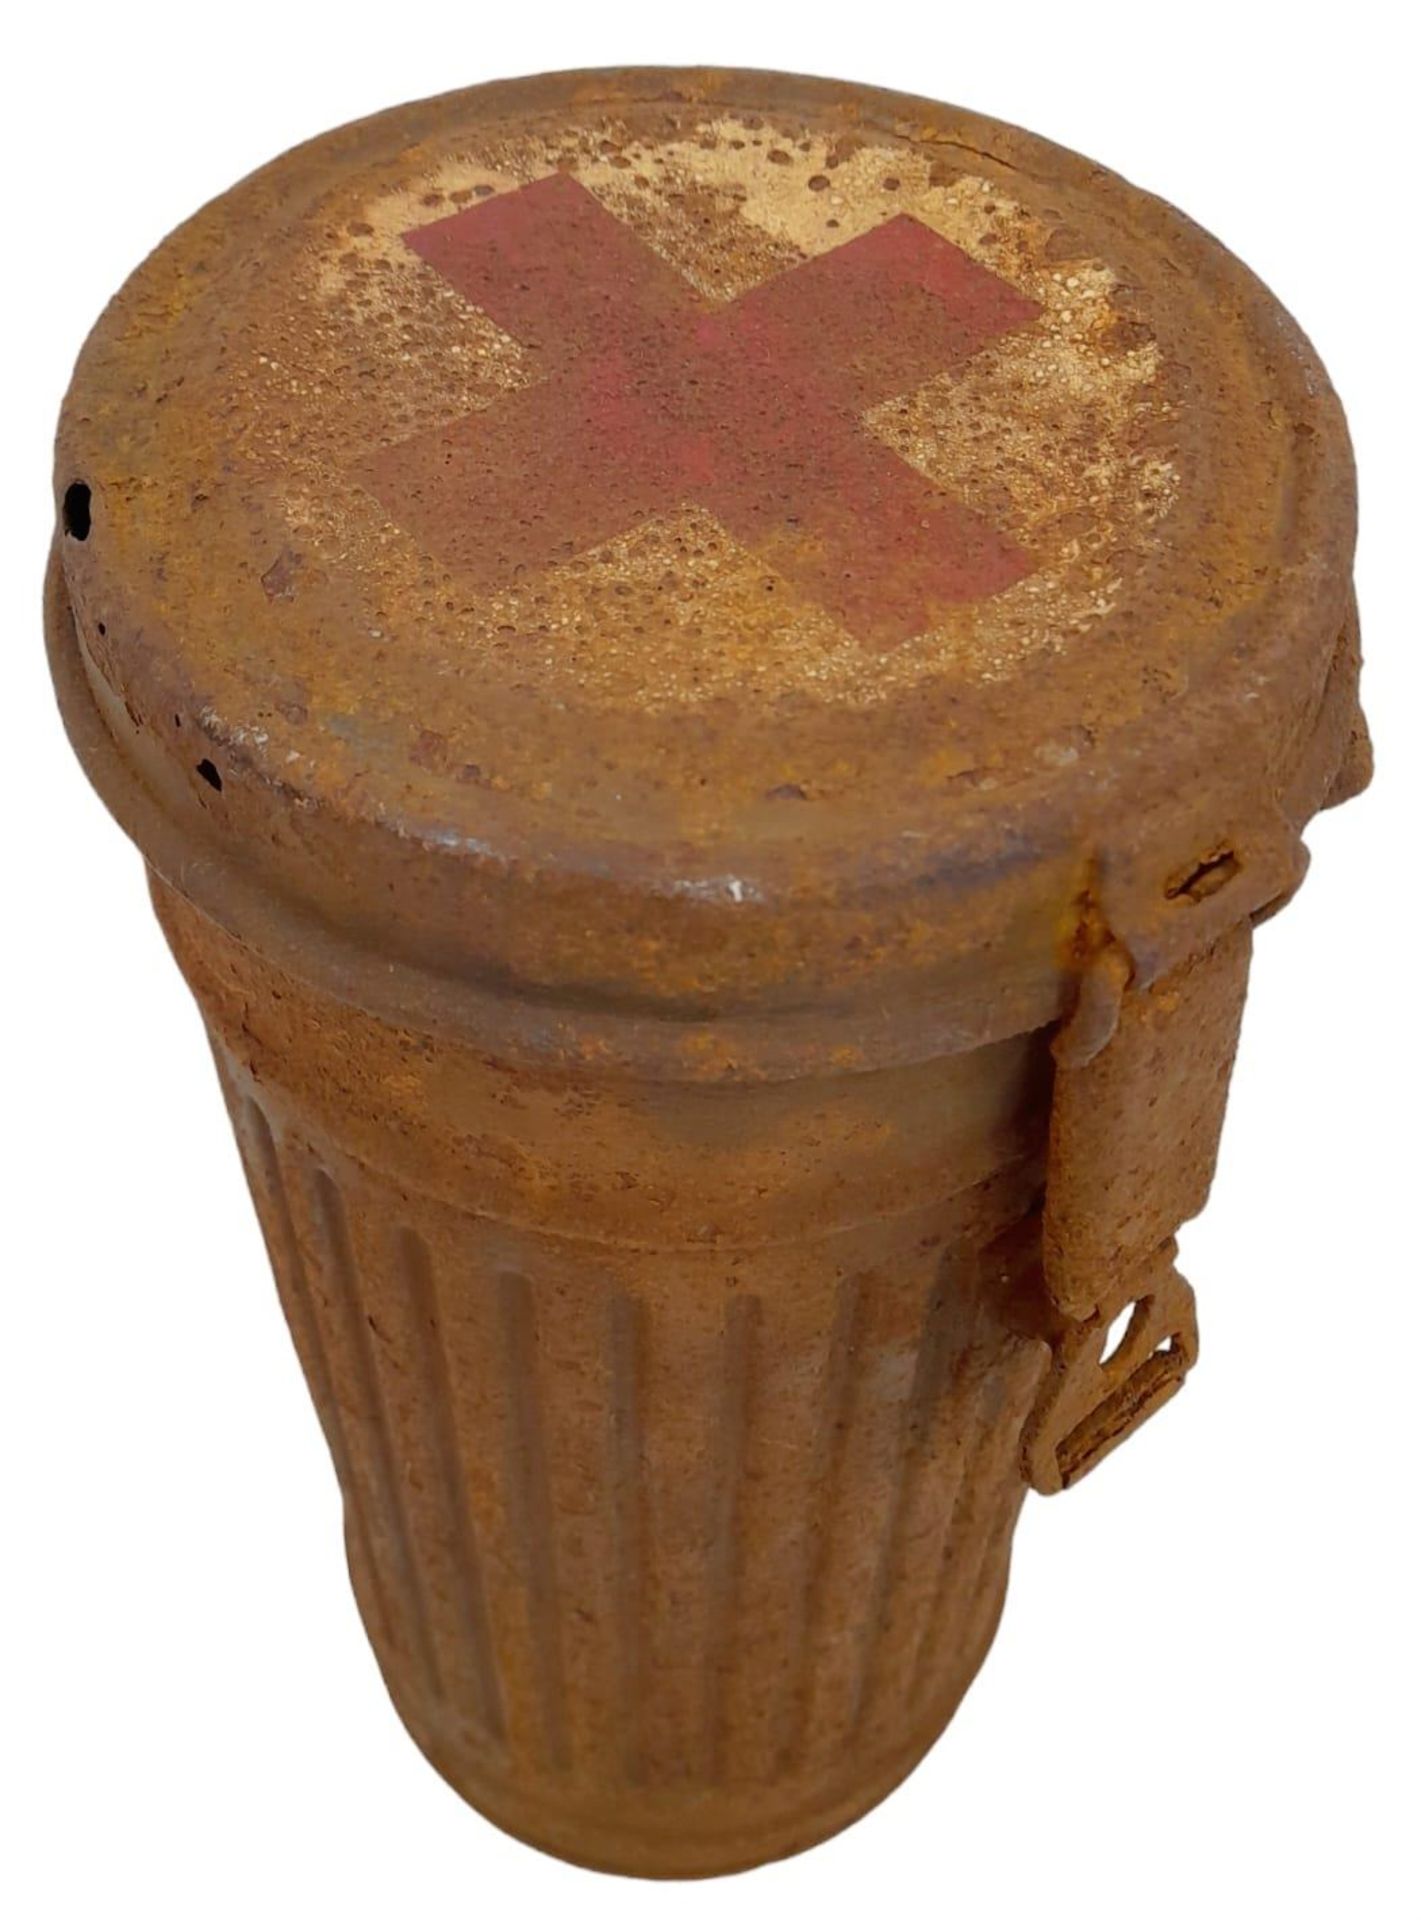 Semi Relic WW2 German Medics Gas Mask Canister. With remains of Normandy Camouflage - Image 5 of 9